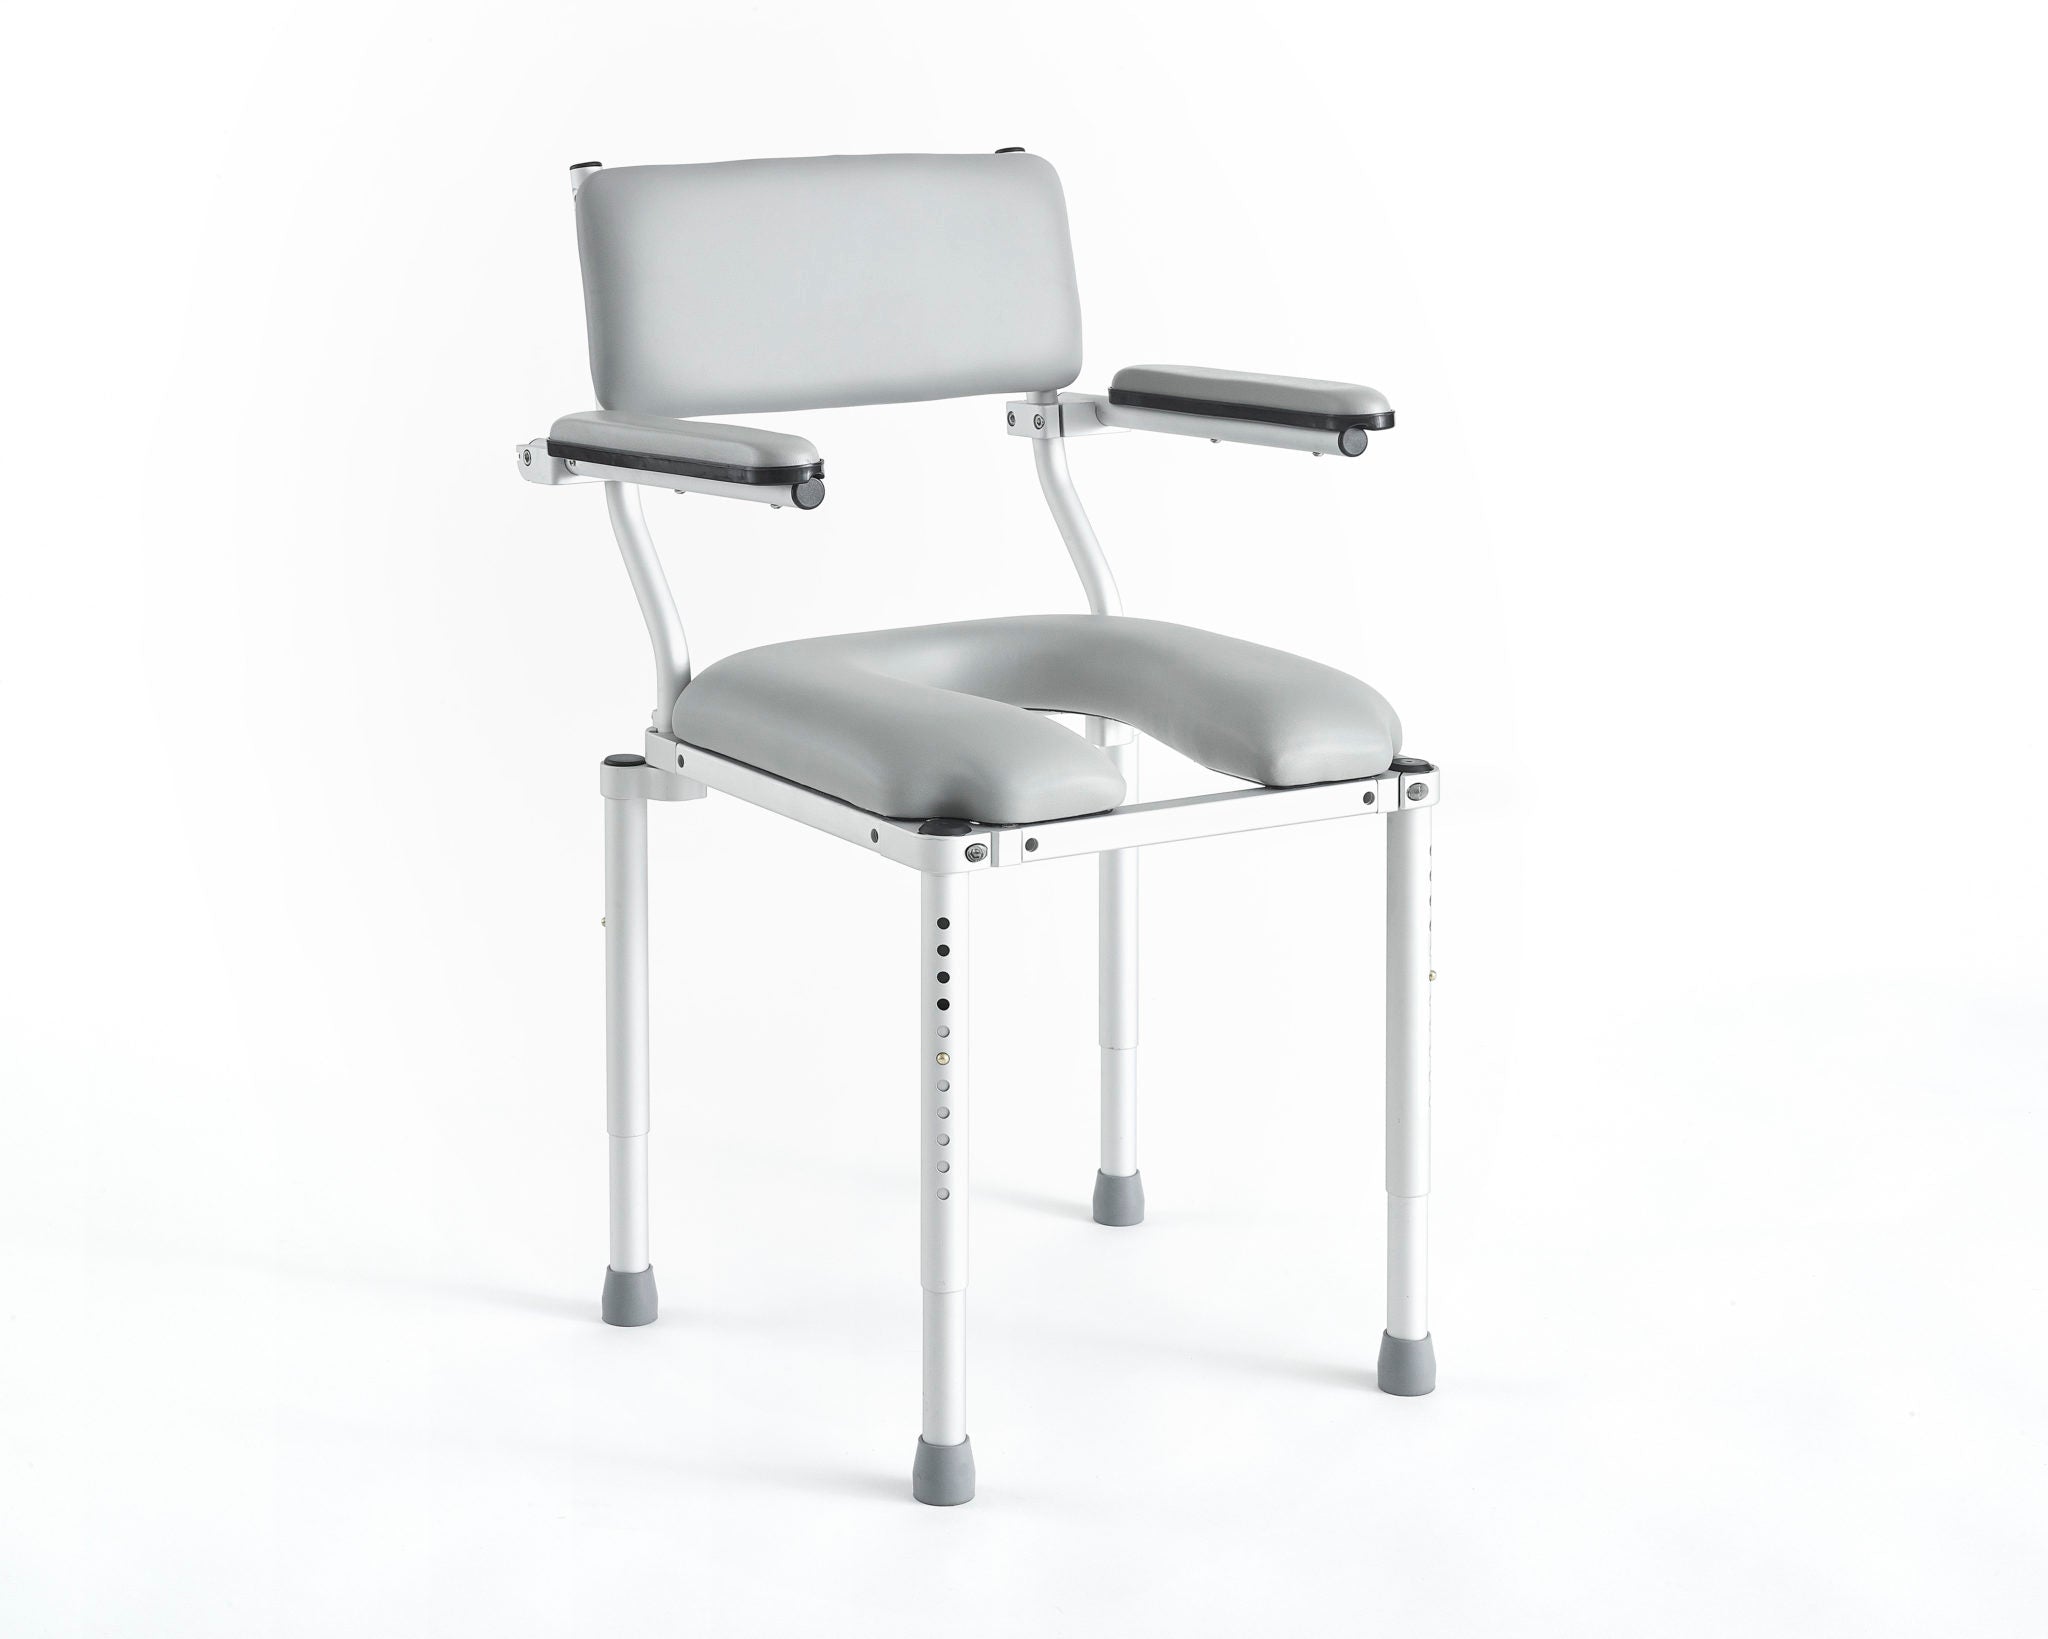 Nuprodx MC3000 Shower/Commode Chair